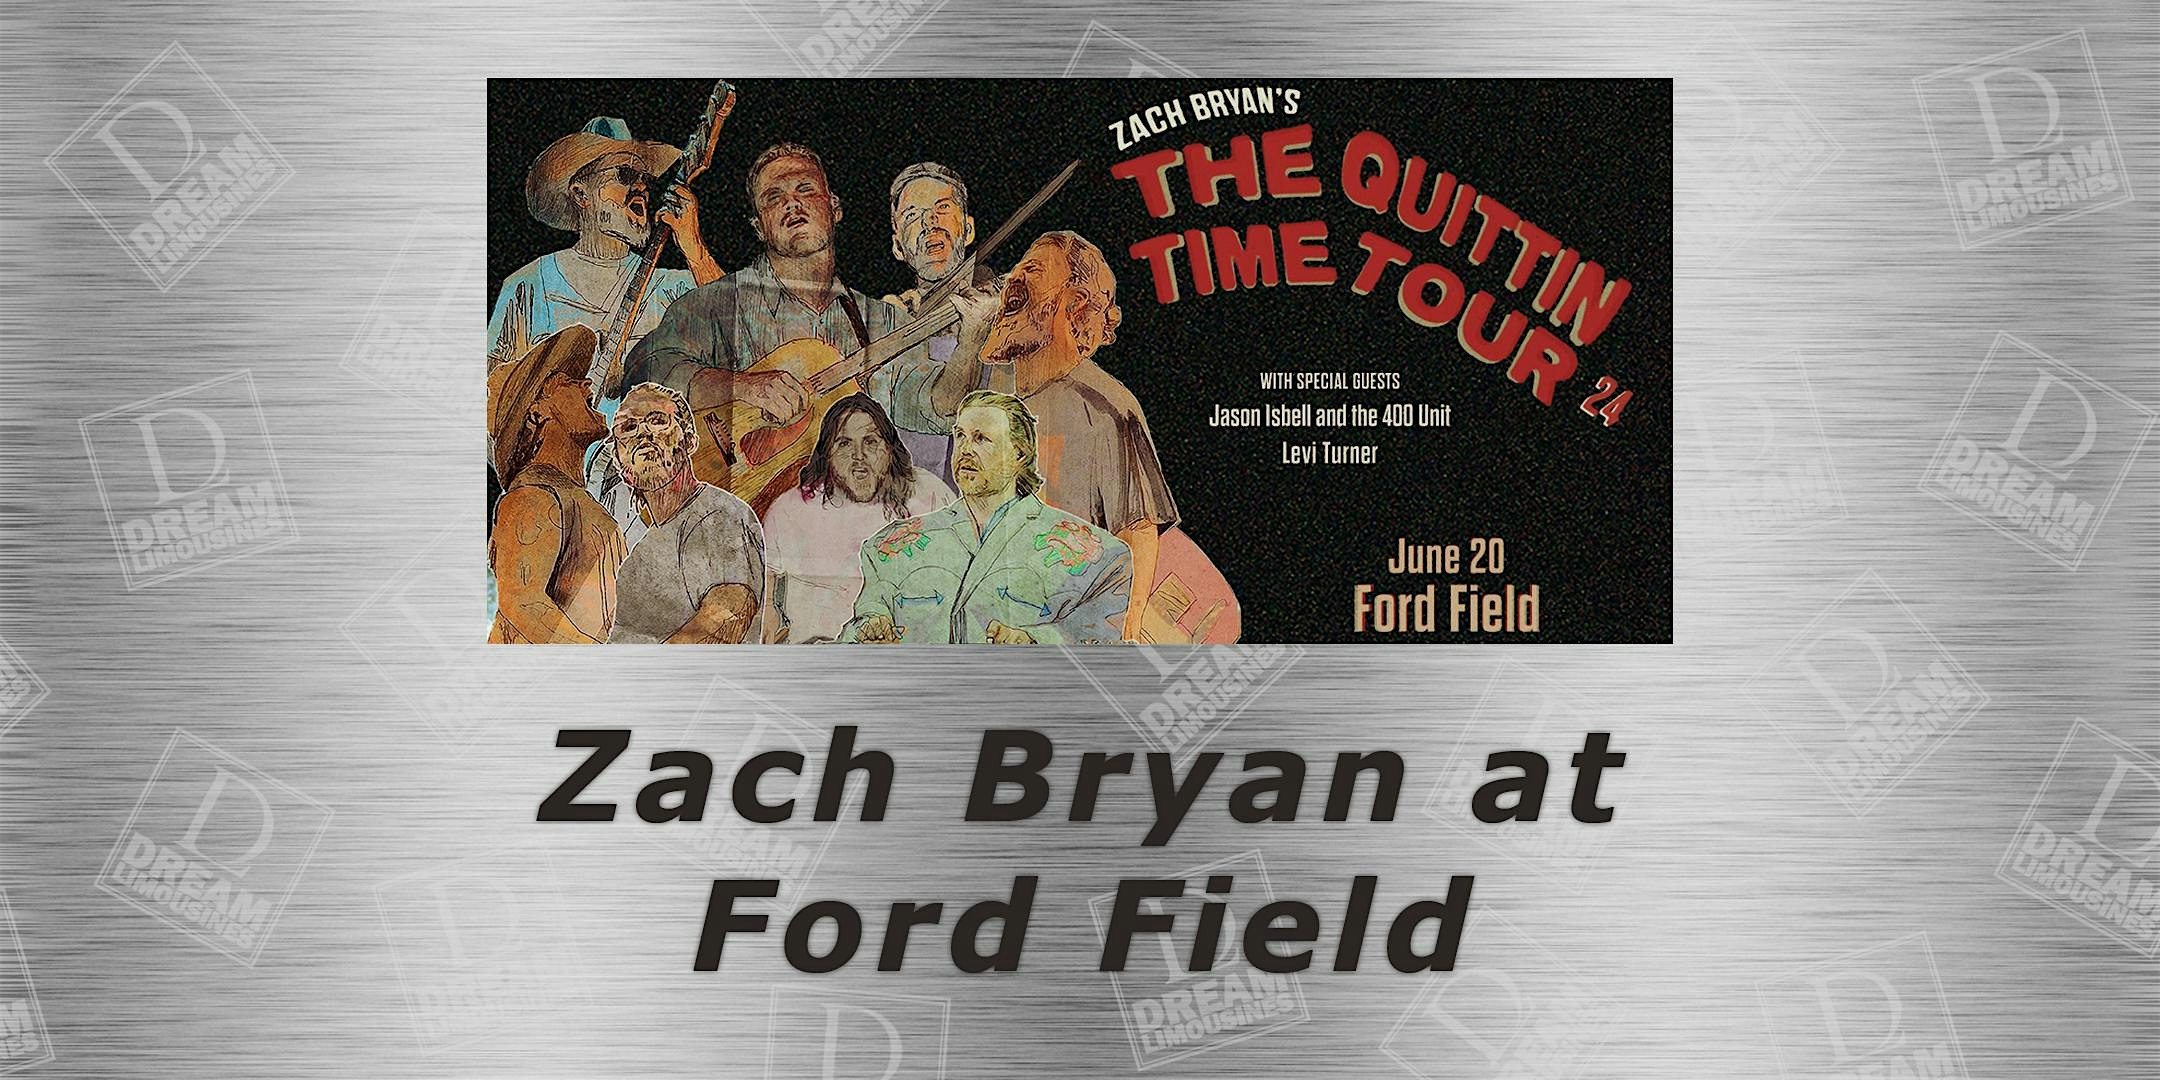 Shuttle Bus to See Zach Bryan at Ford Field